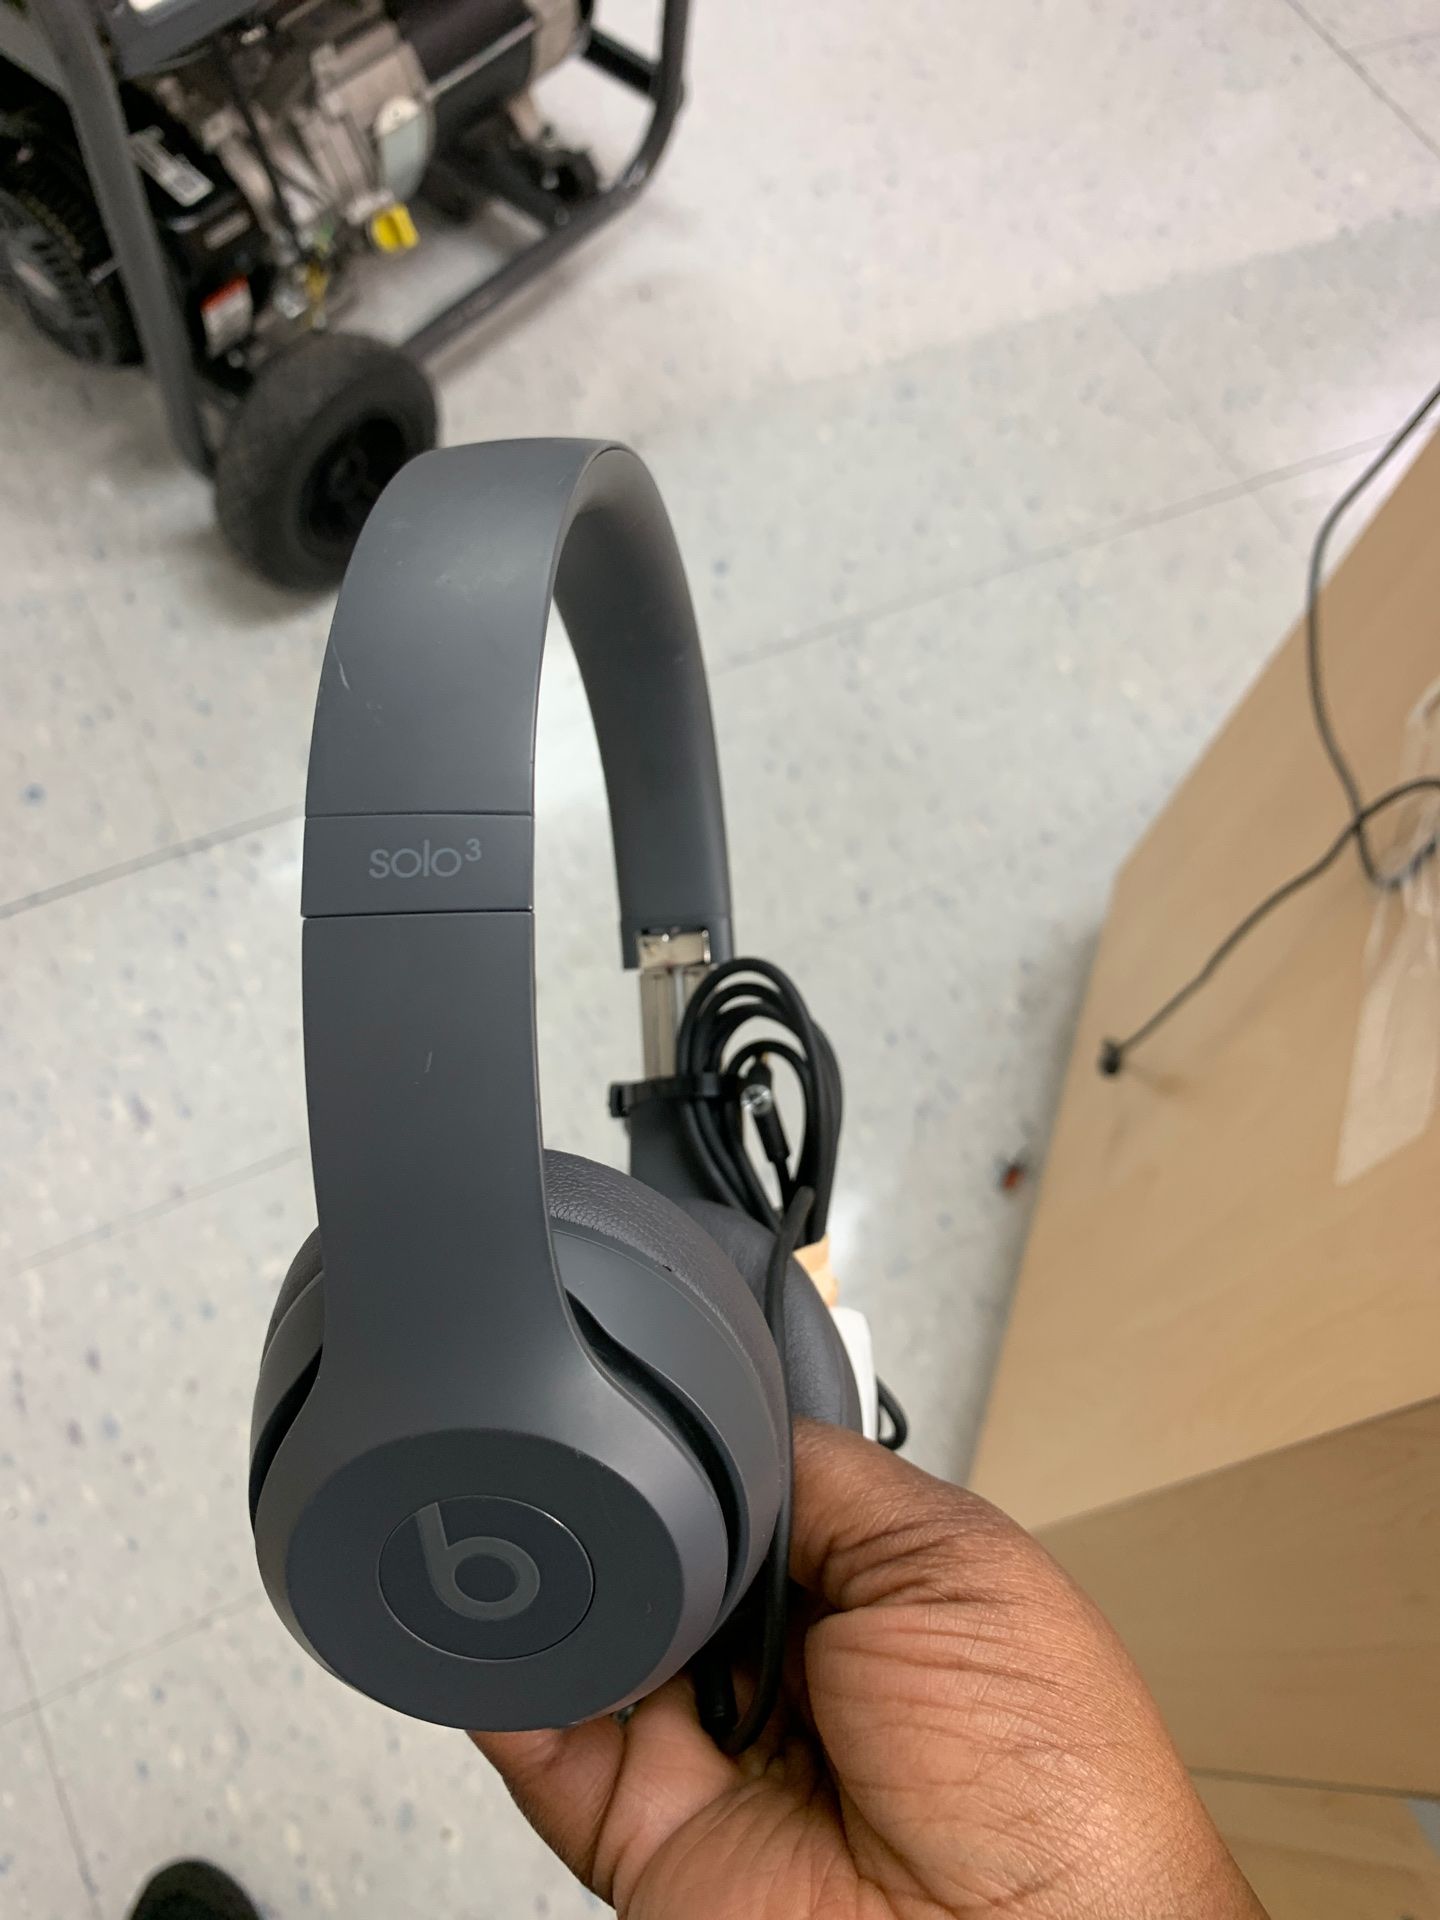 Beats solo 3 $100 or $10 down for layaway